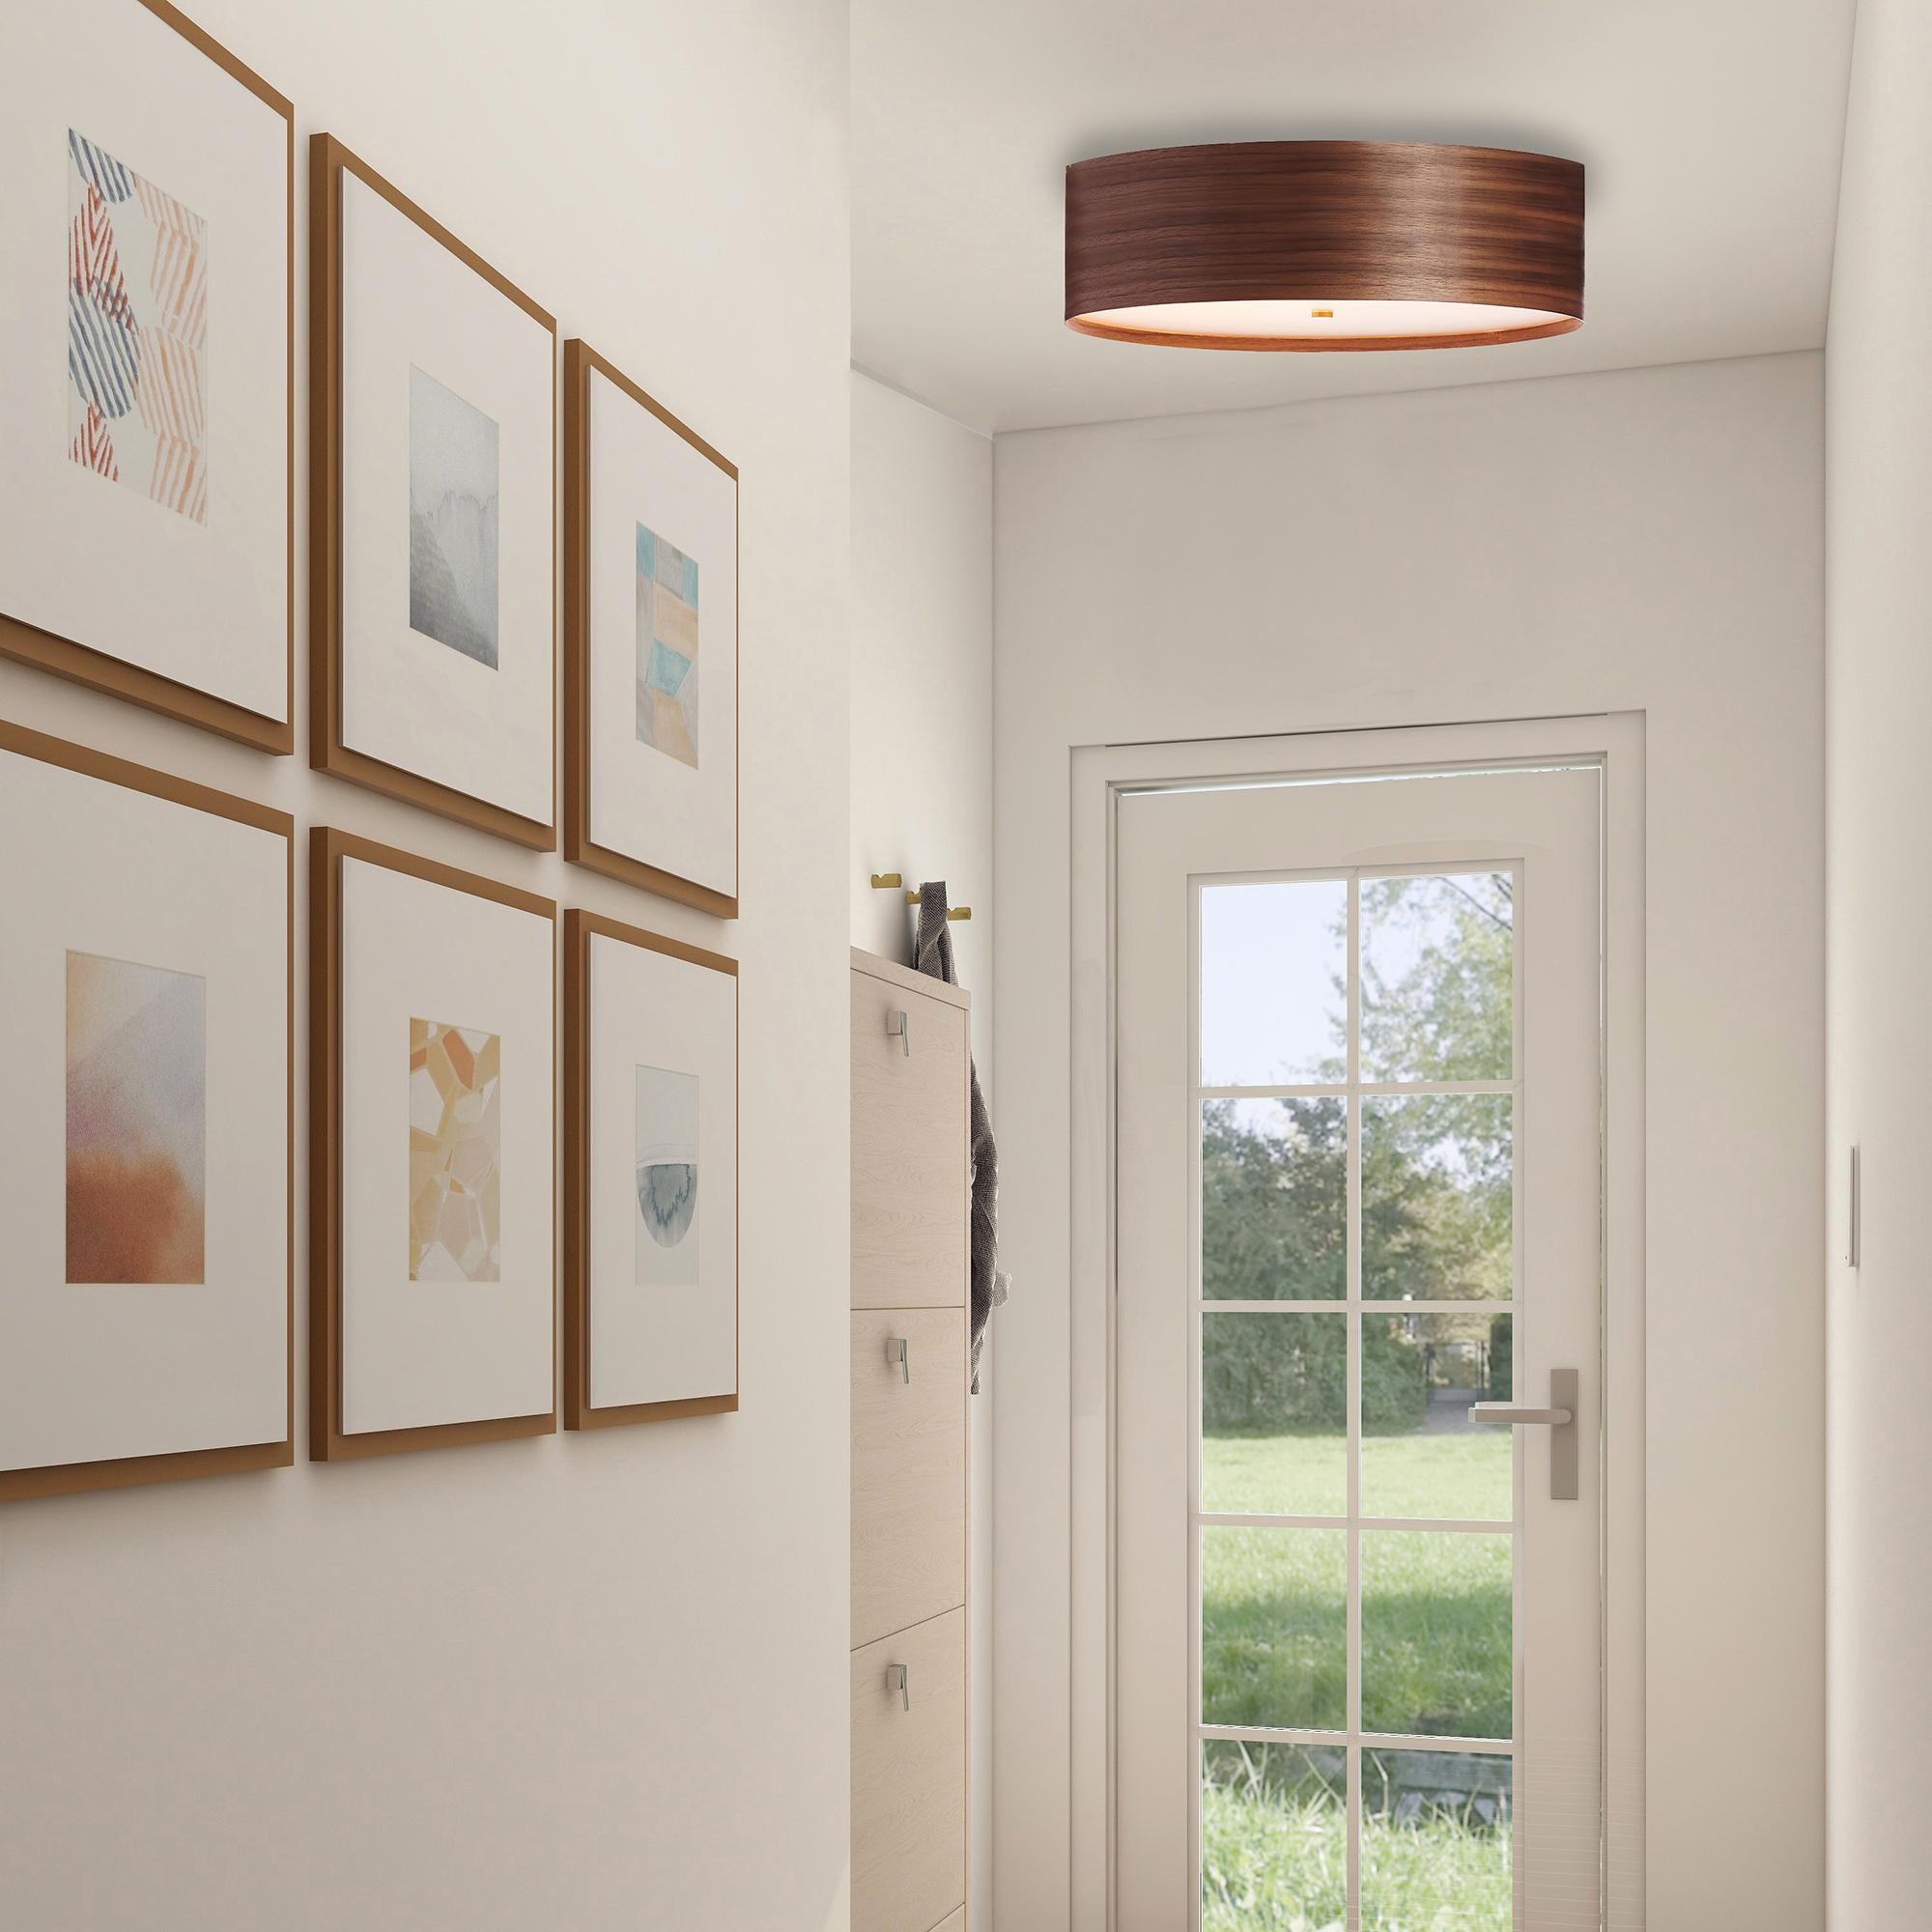 GORIN is a contemporary, Mid-Century Modern light fixture with a Scandinavian composition. This is a minimalist luxury wood veneer flush mount design and can be exhibited in living rooms, offices, and conference rooms. Walnut is prized by designers